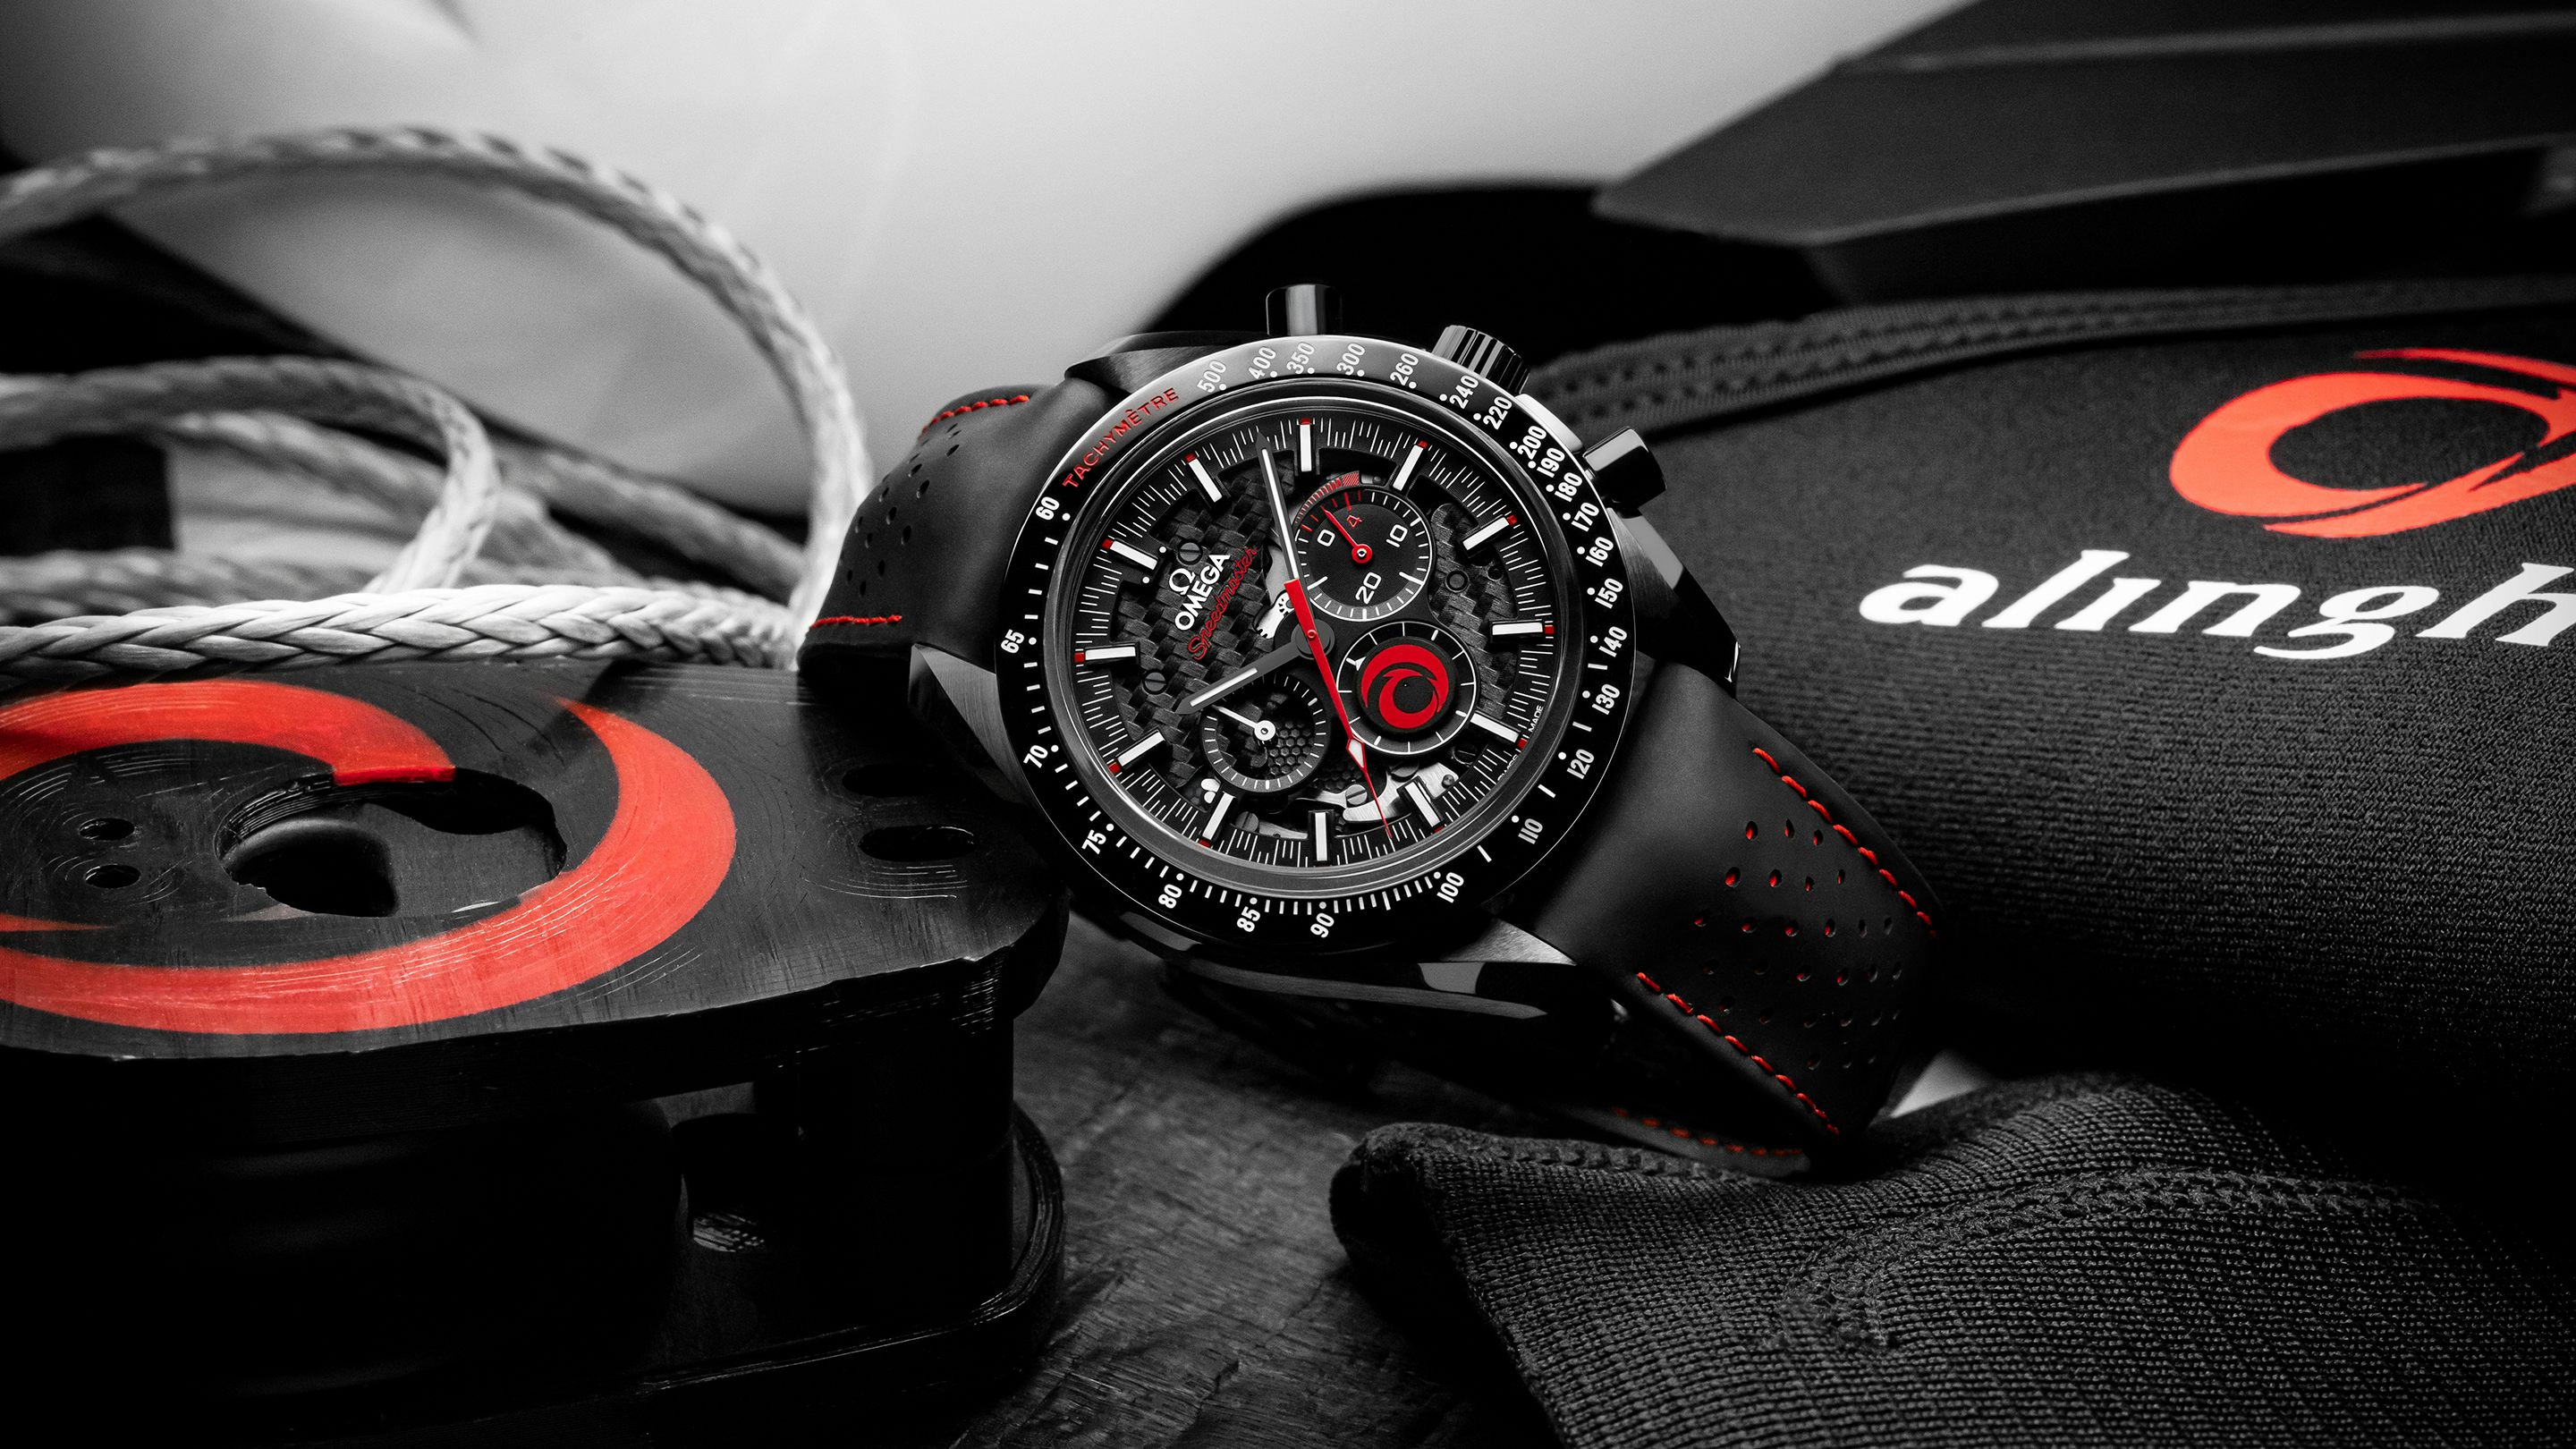 This sports watch is a treat for real yachtsmen